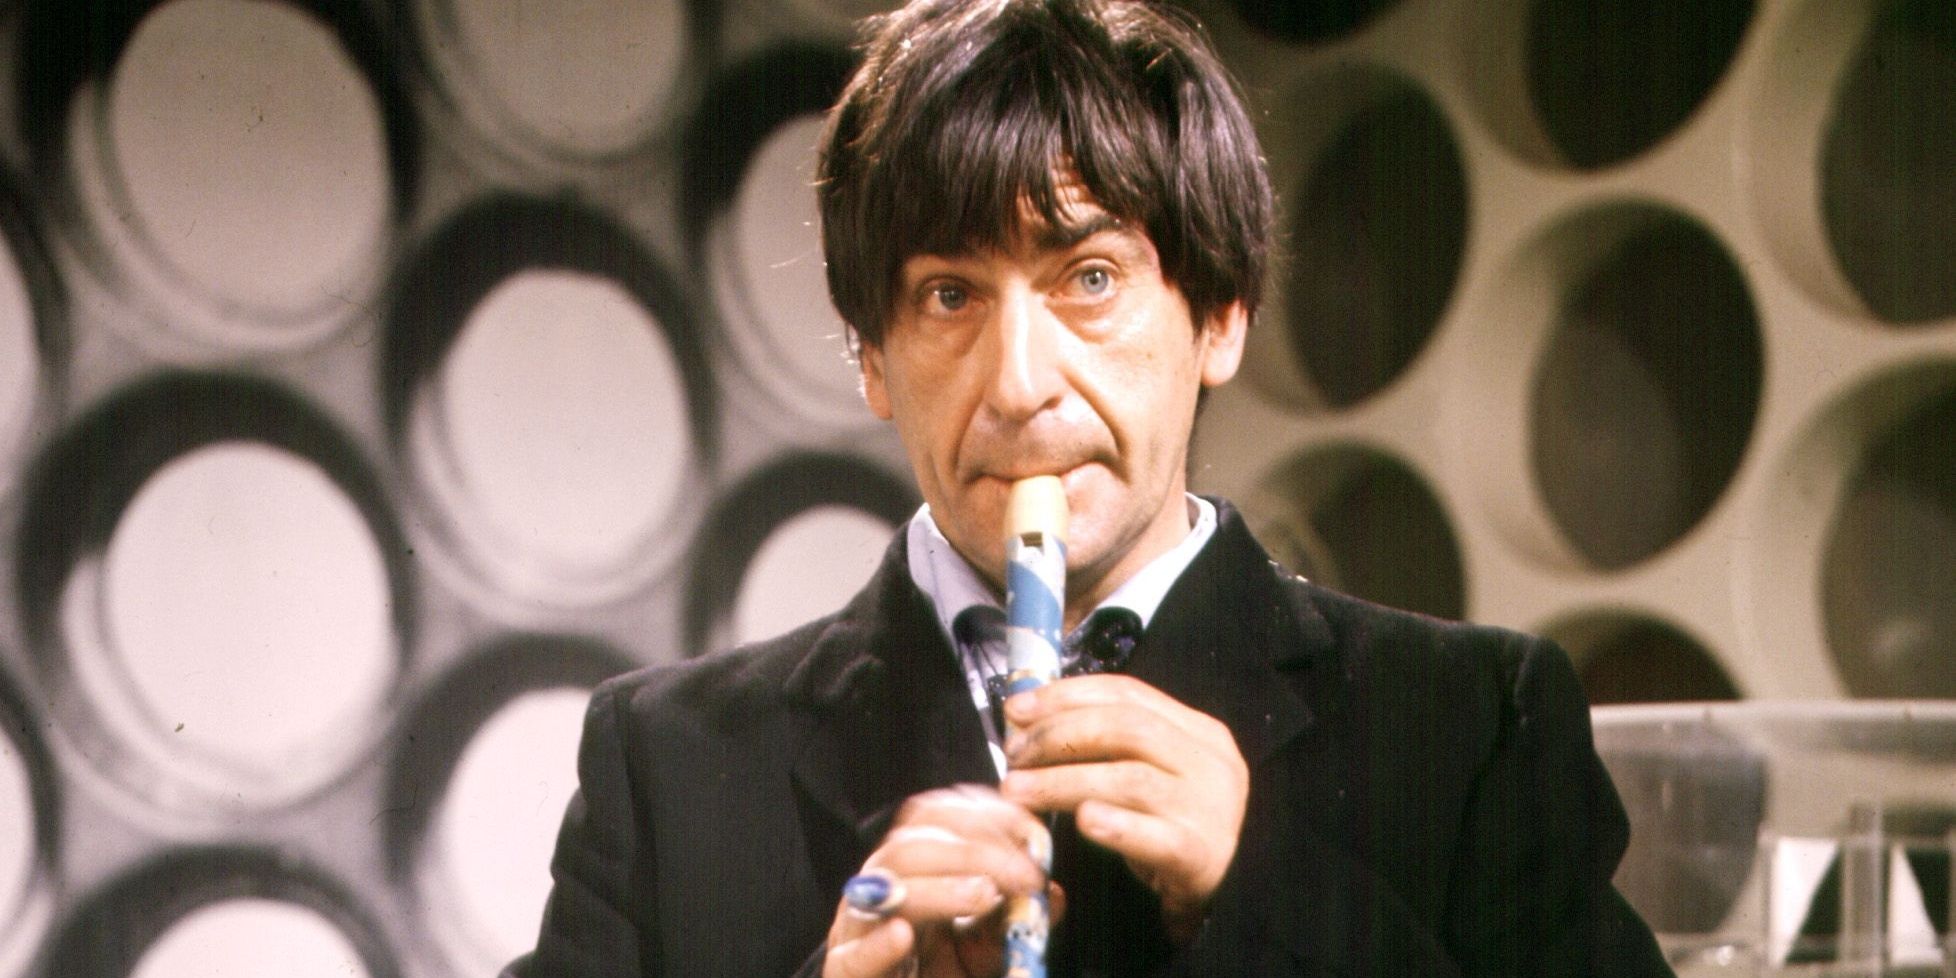 Second Doctor playing the flute in Doctor Who 